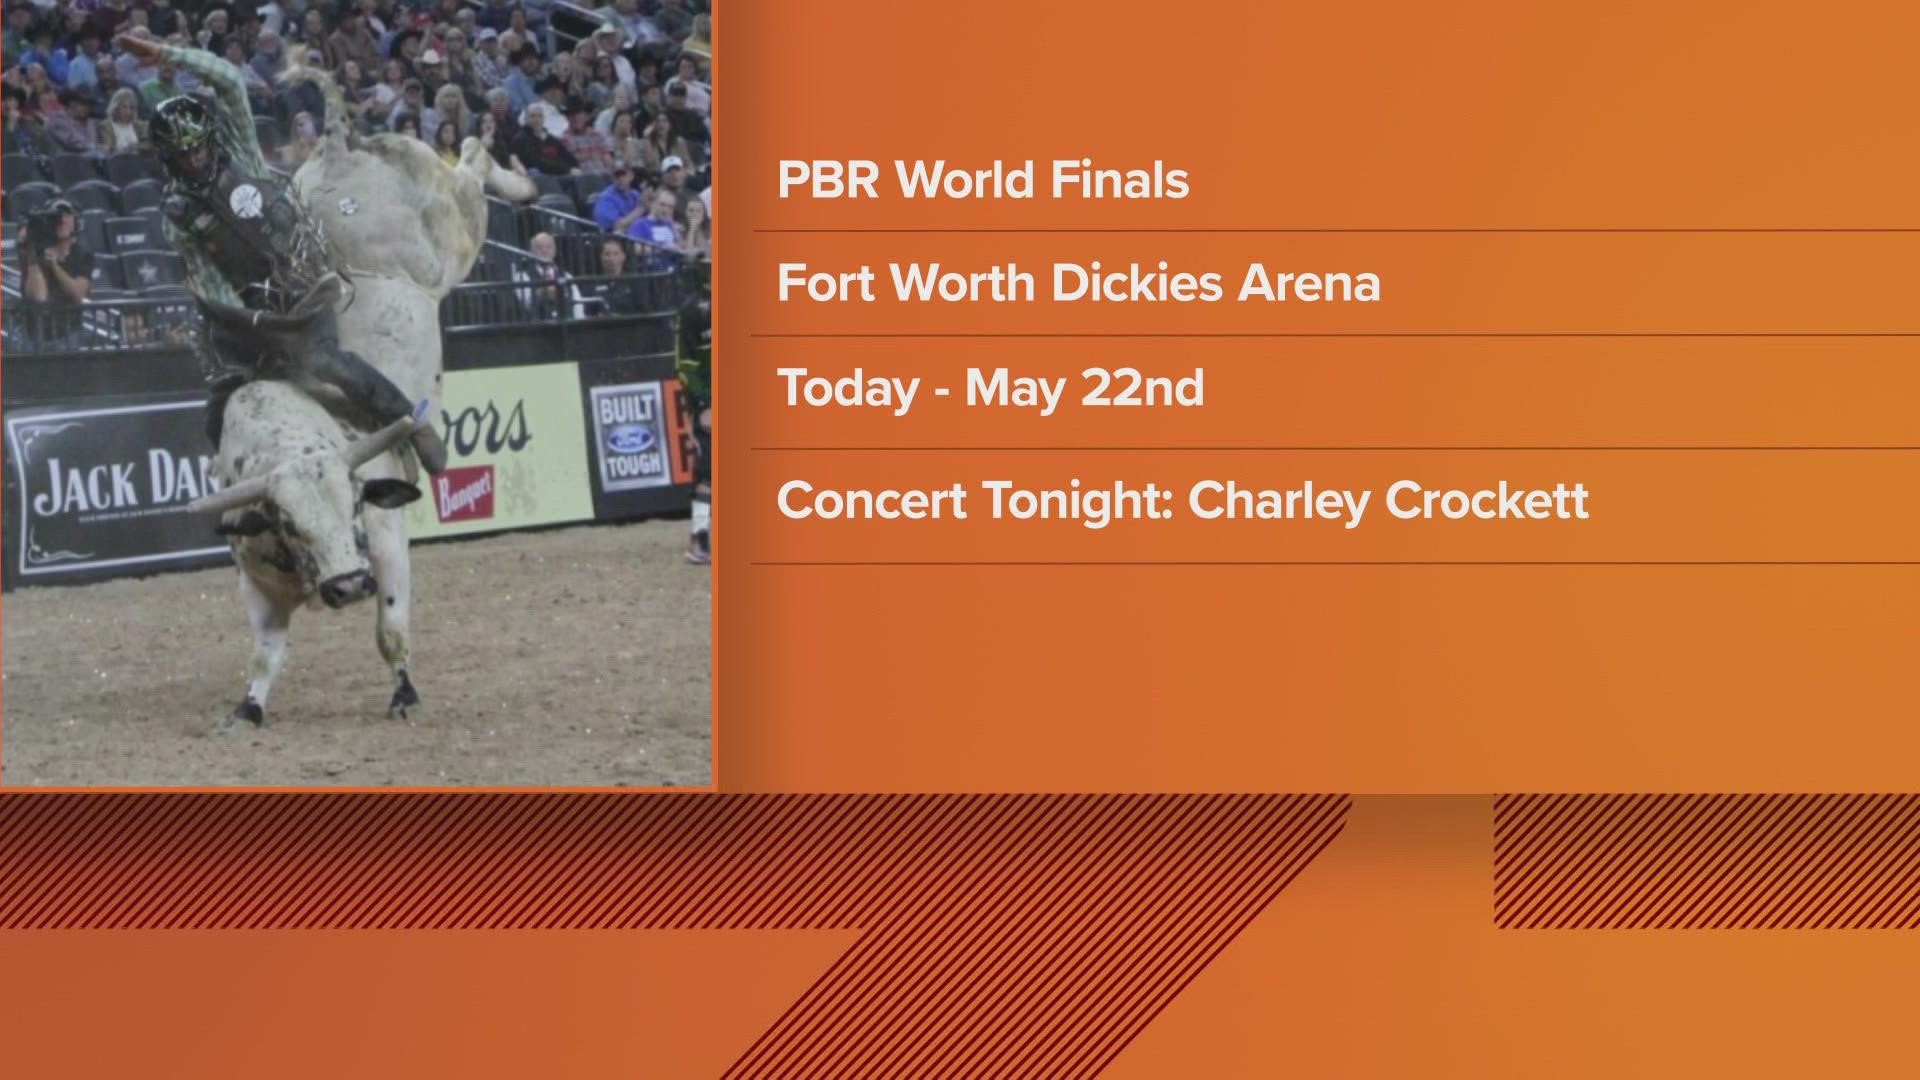 The PBR World Finals starts Friday night at Dickies Arena in Fort Worth, Texas.